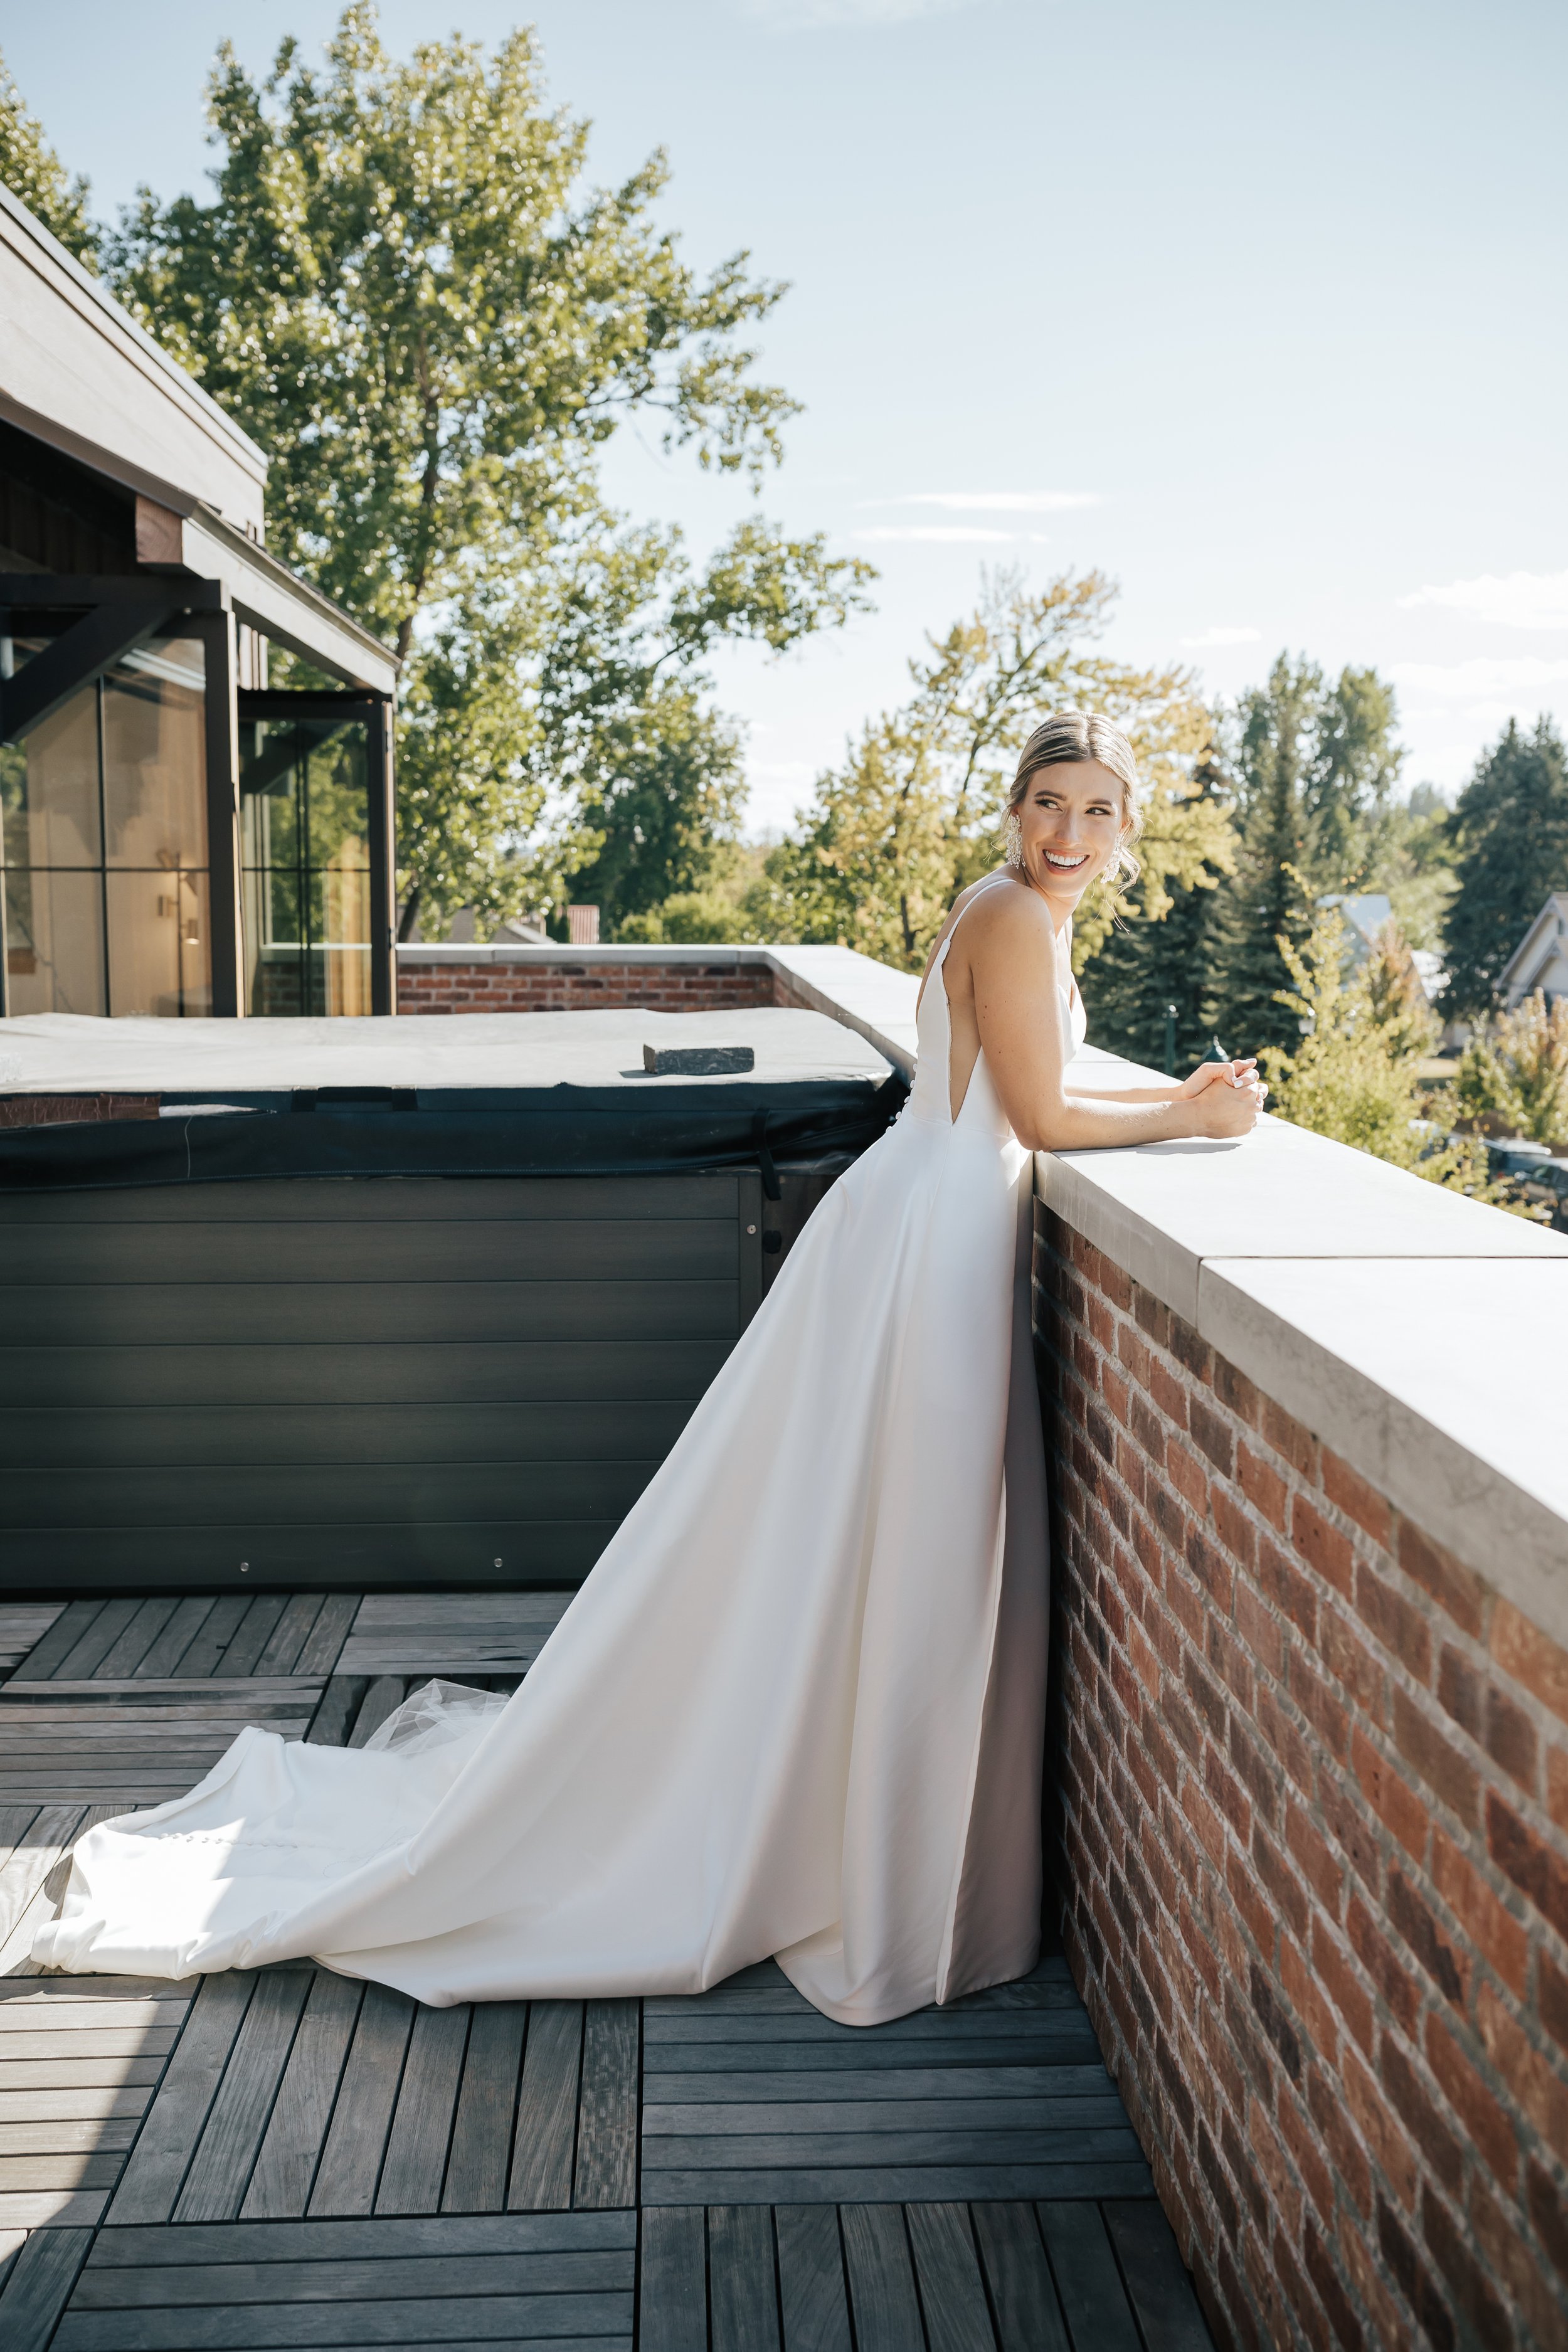  Bride looks out on hotel balcony in wedding dress before the wedding ceremony begins on a warm summer day in Whitefish, Montana. #bride #gettingready #montanawedding 